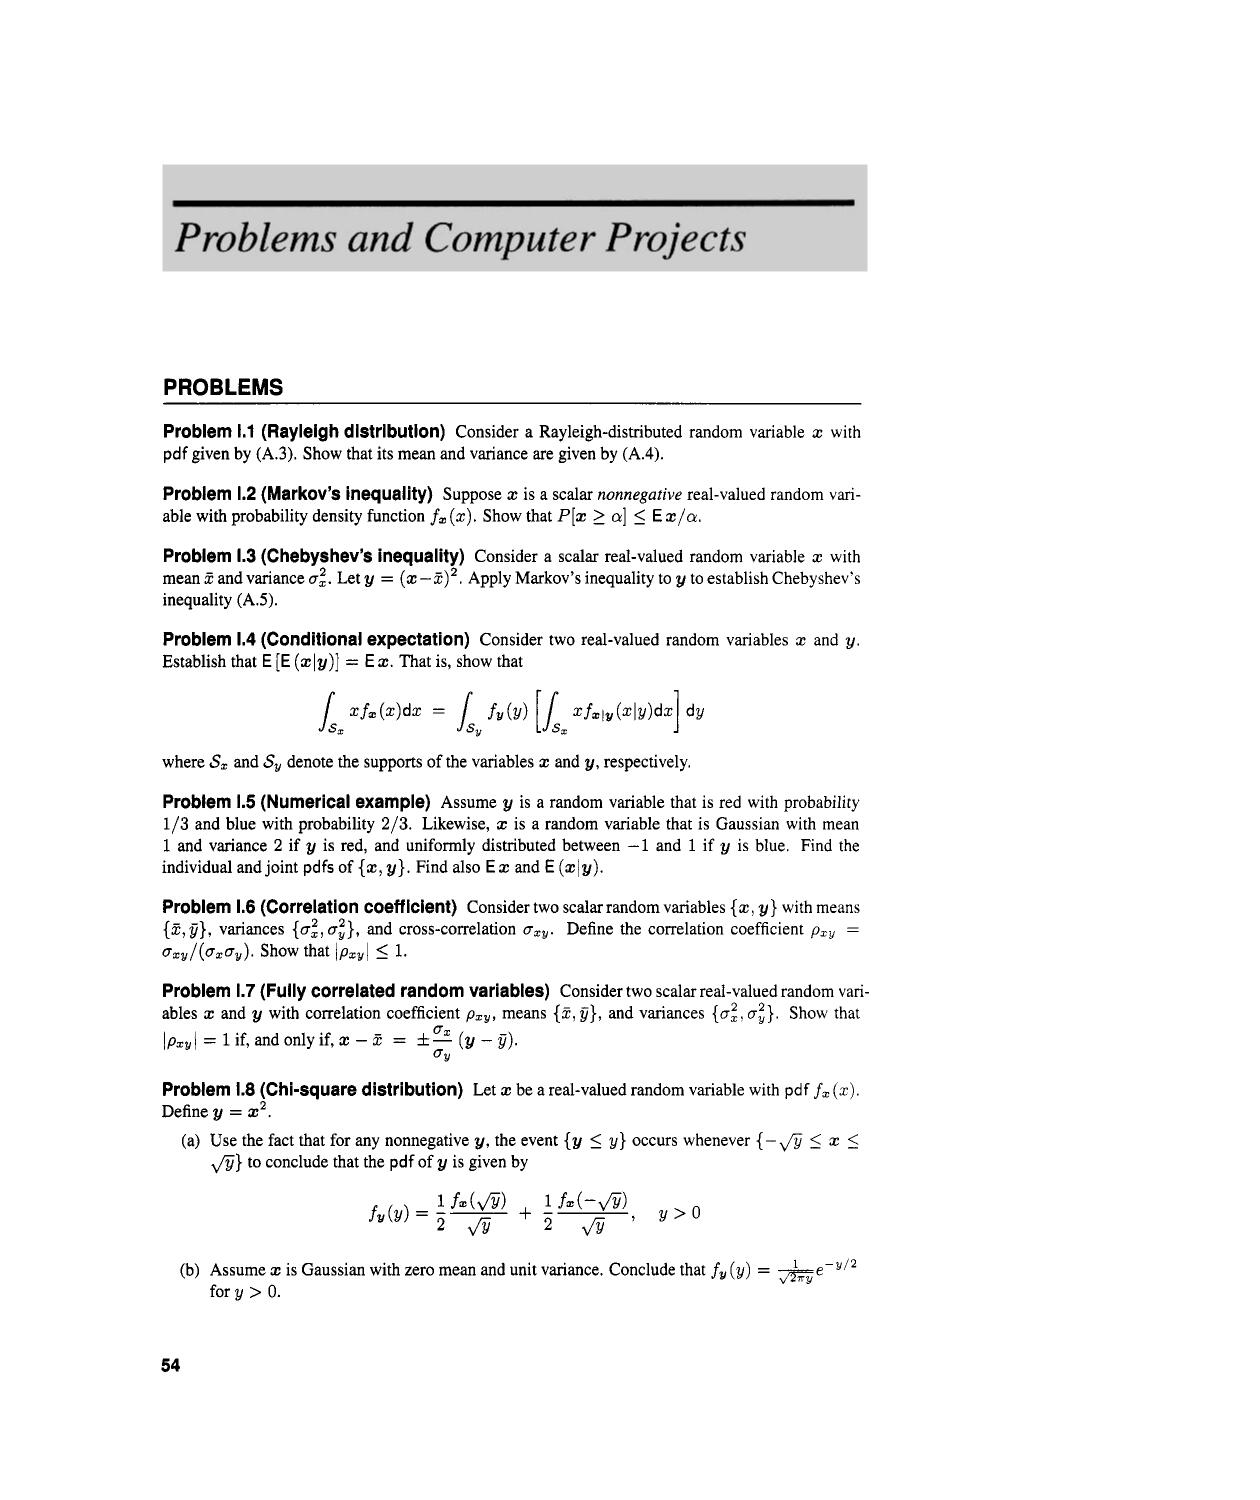 Problems and Computer Projects